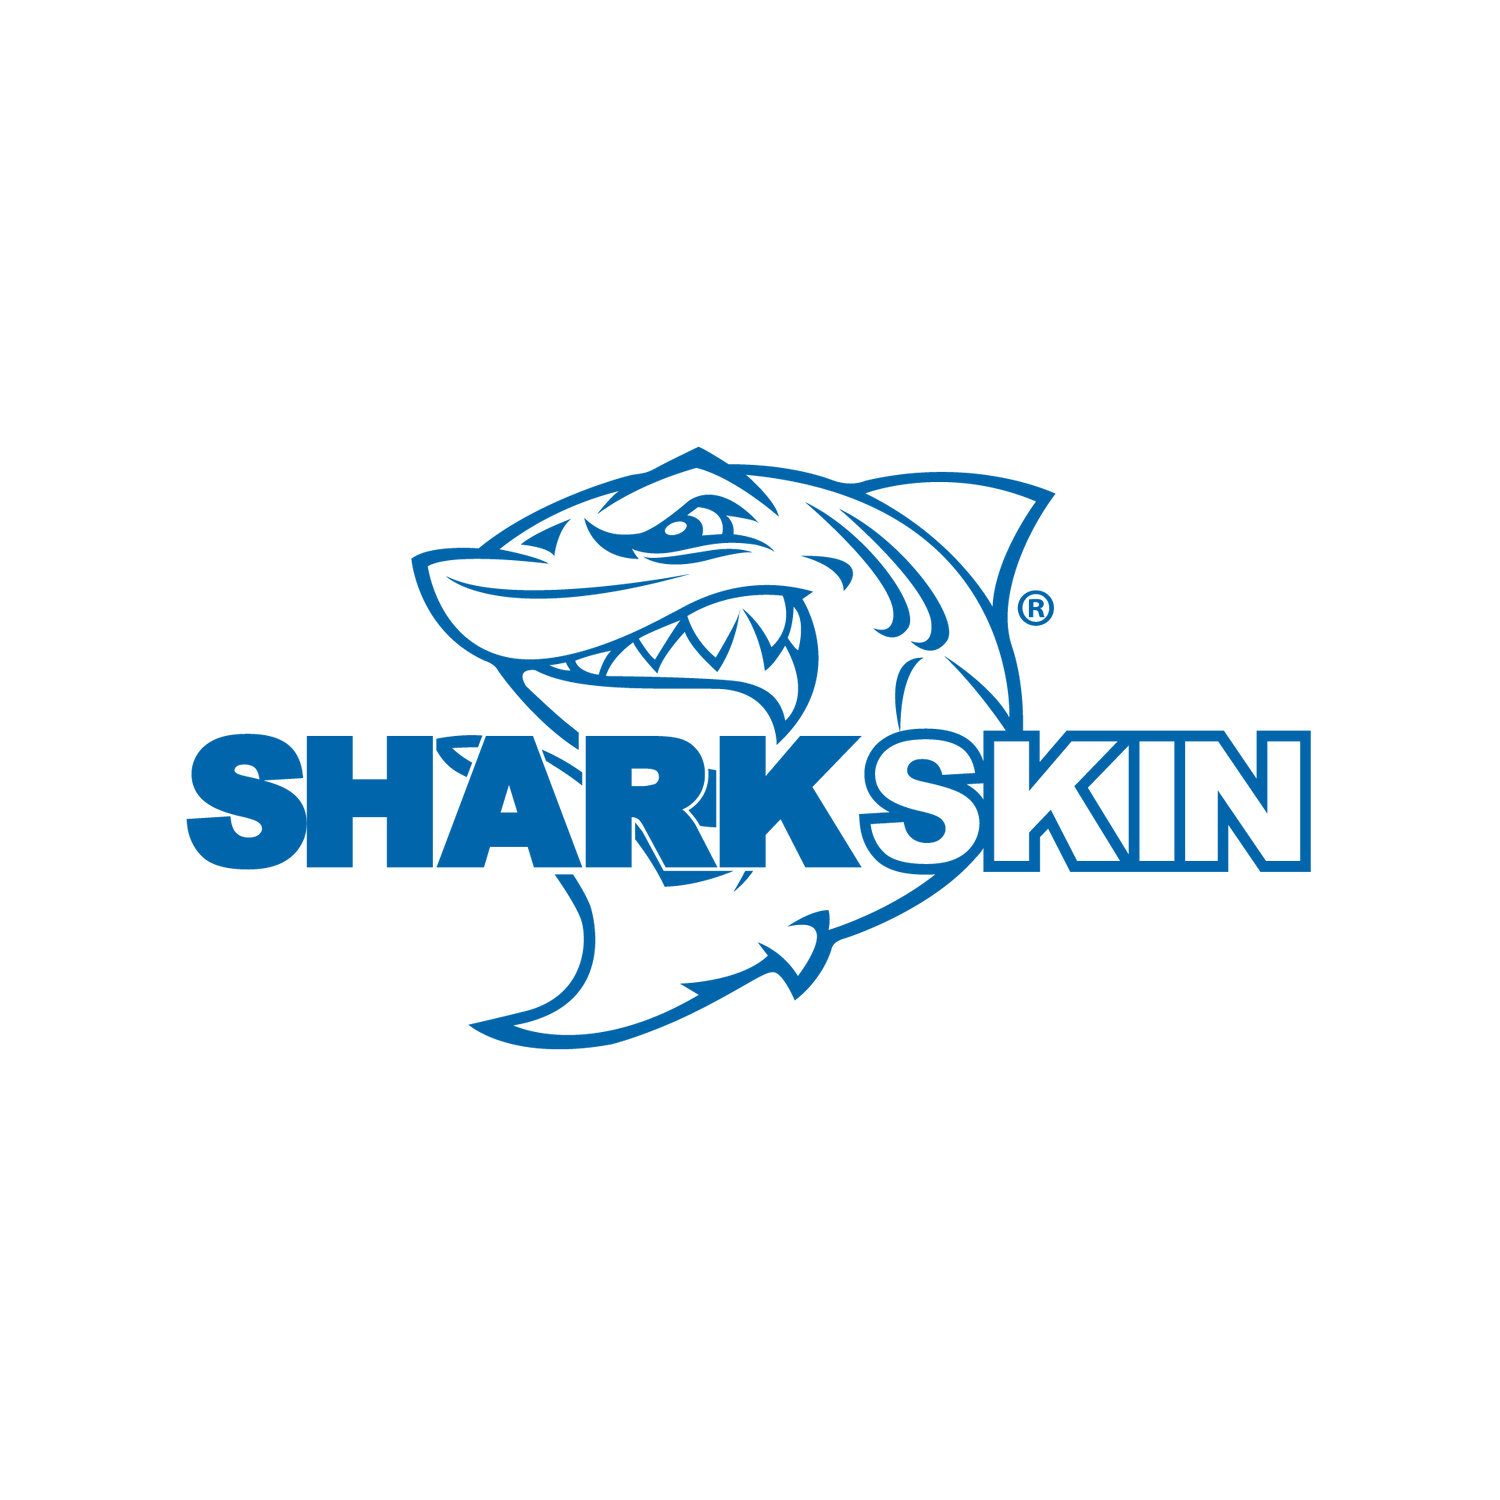 SharkSkin, GetBranded exclusive laminated vinyl material has a textured matte finish that is durable, scuff-resistant, and UV-protected to last for years.